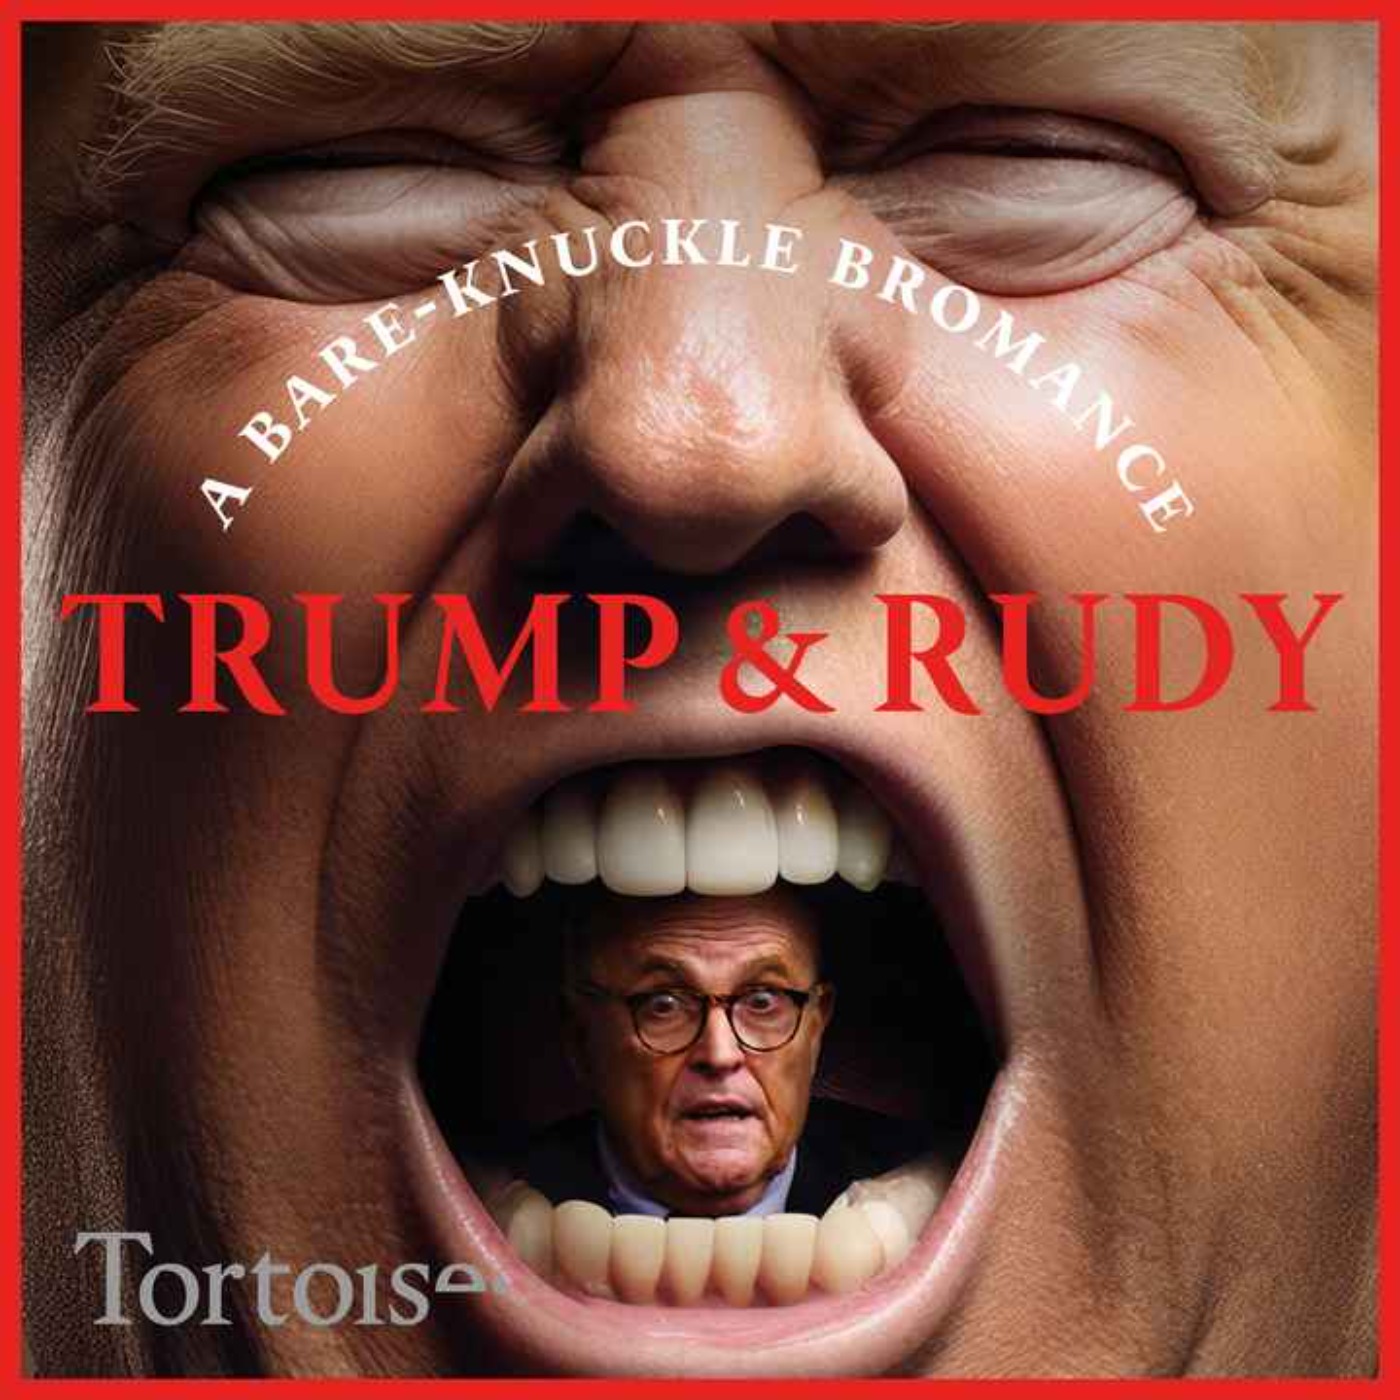 Trump and Rudy: A bare-knuckle romance - episode 3